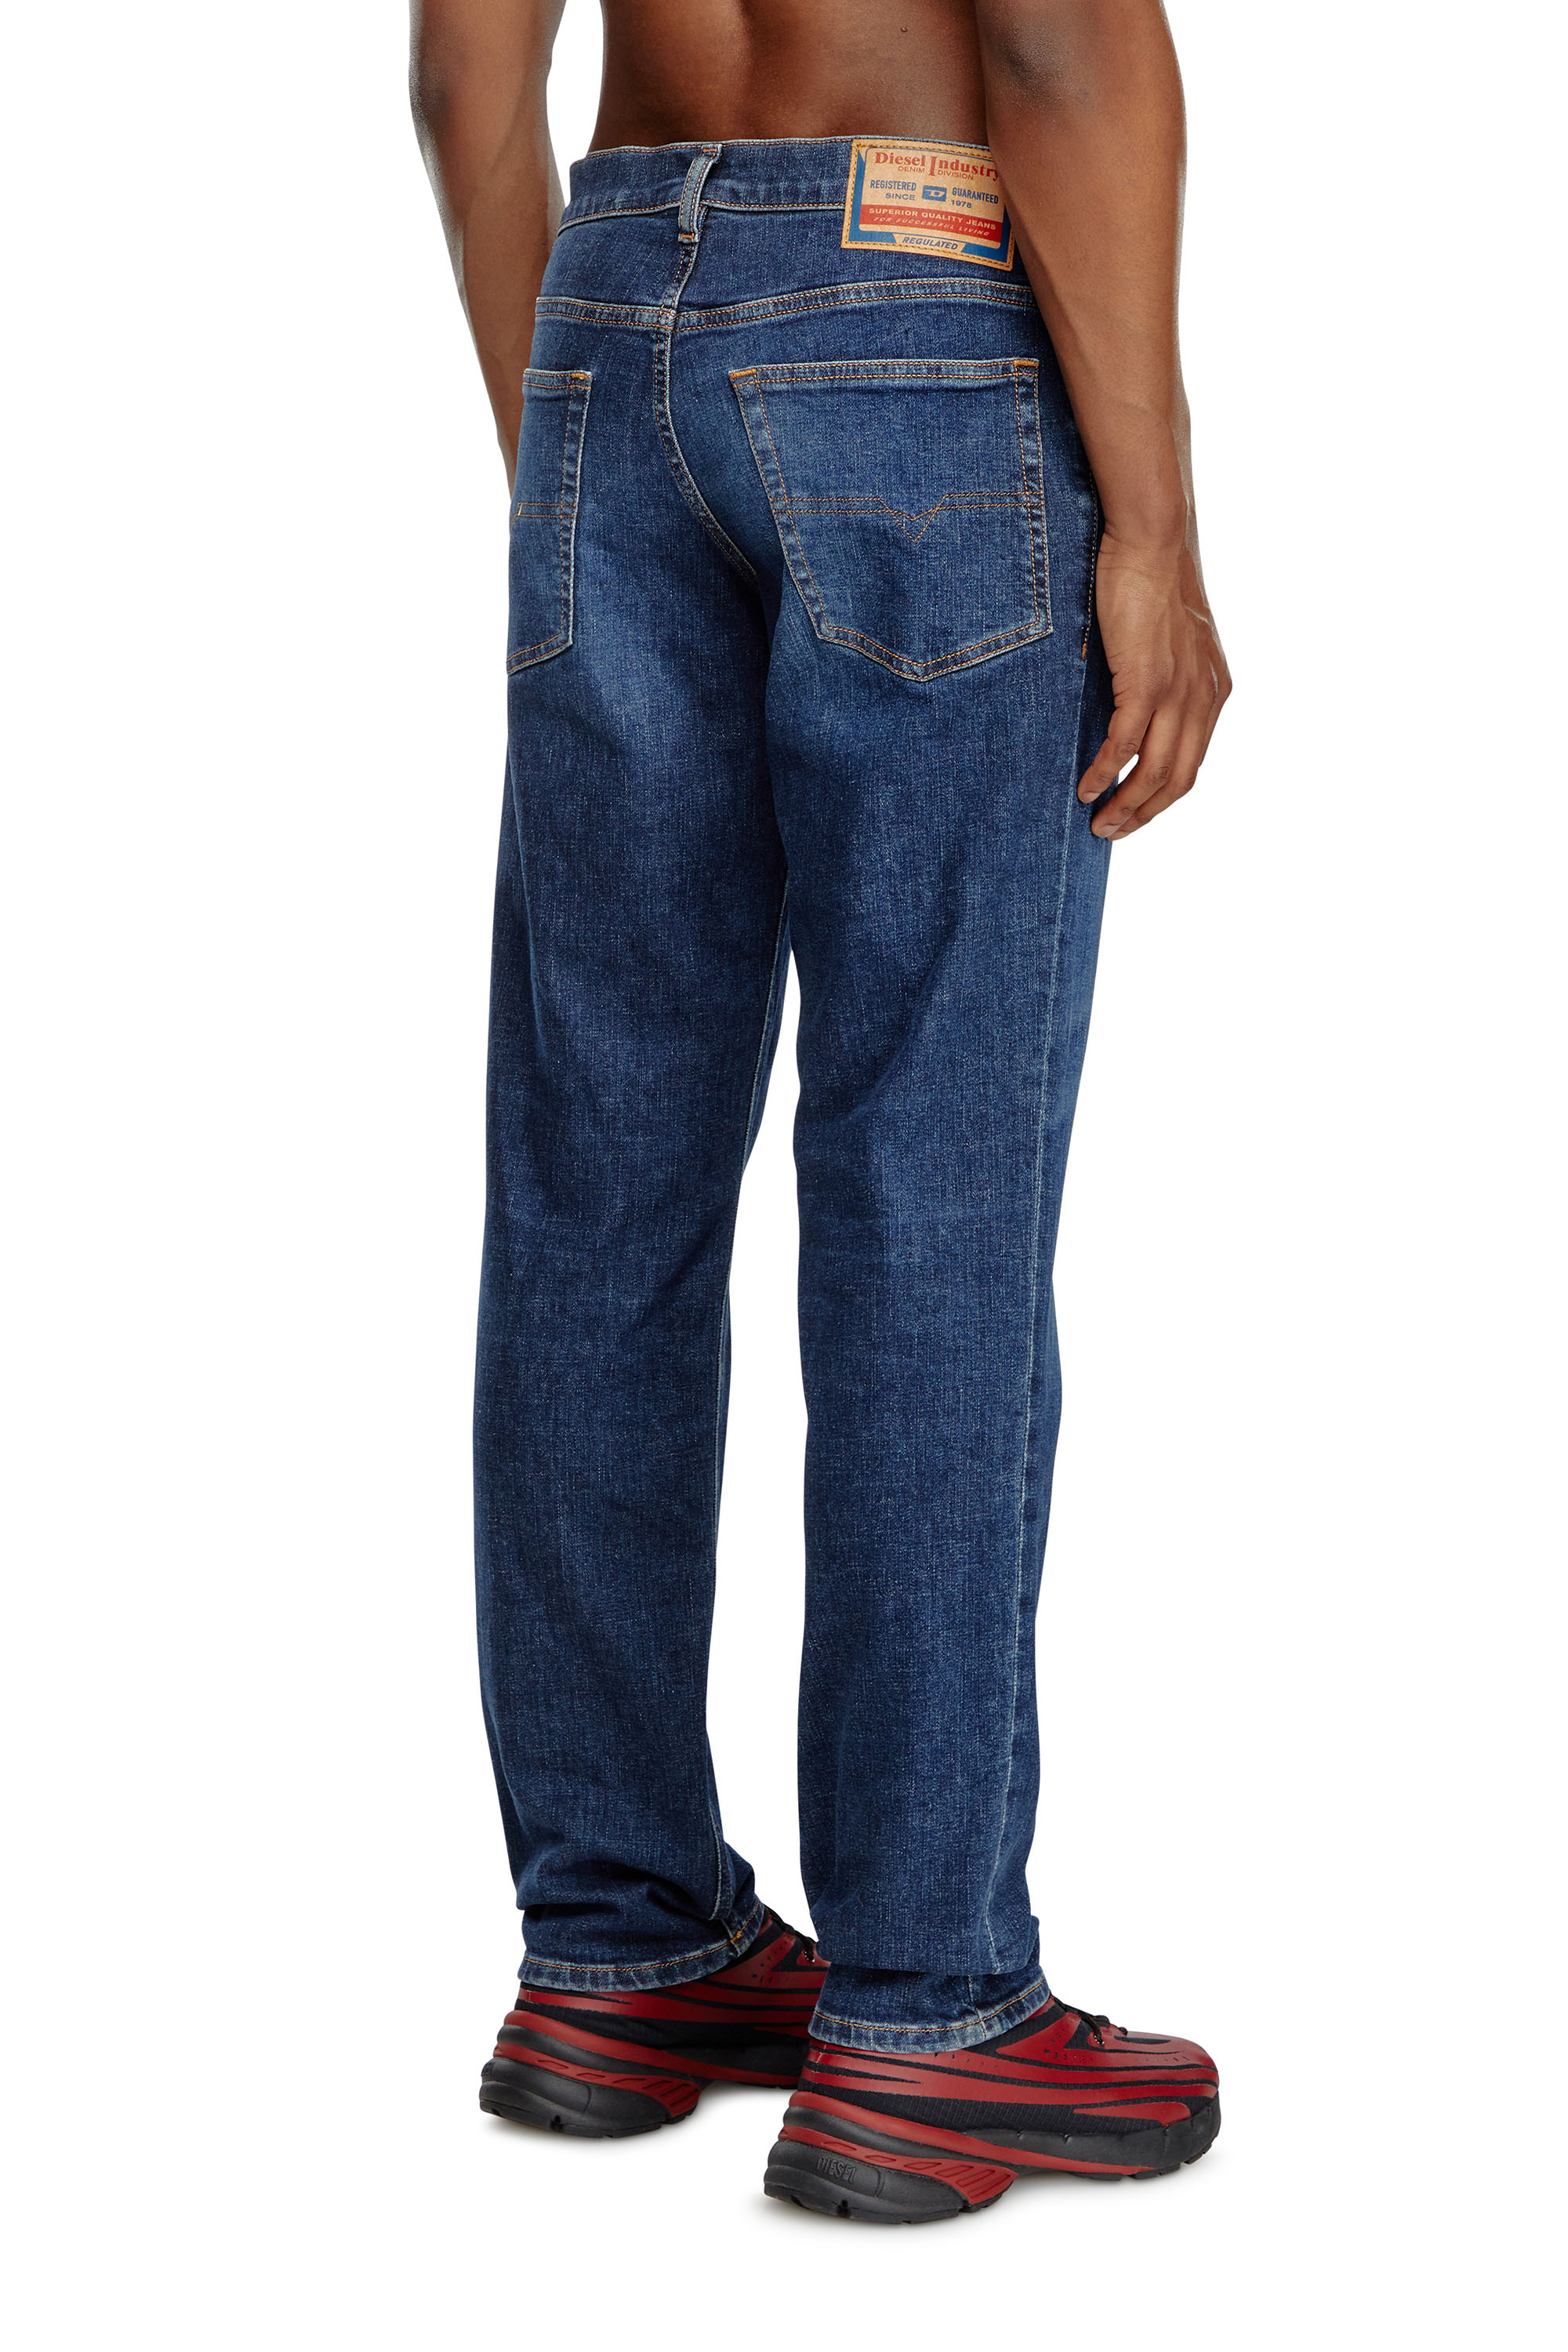 Diesel - Tapered Jeans 2023 D-Finitive 09J47, Hombre Tapered Jeans - 2023 D-Finitive in Azul marino - Image 4